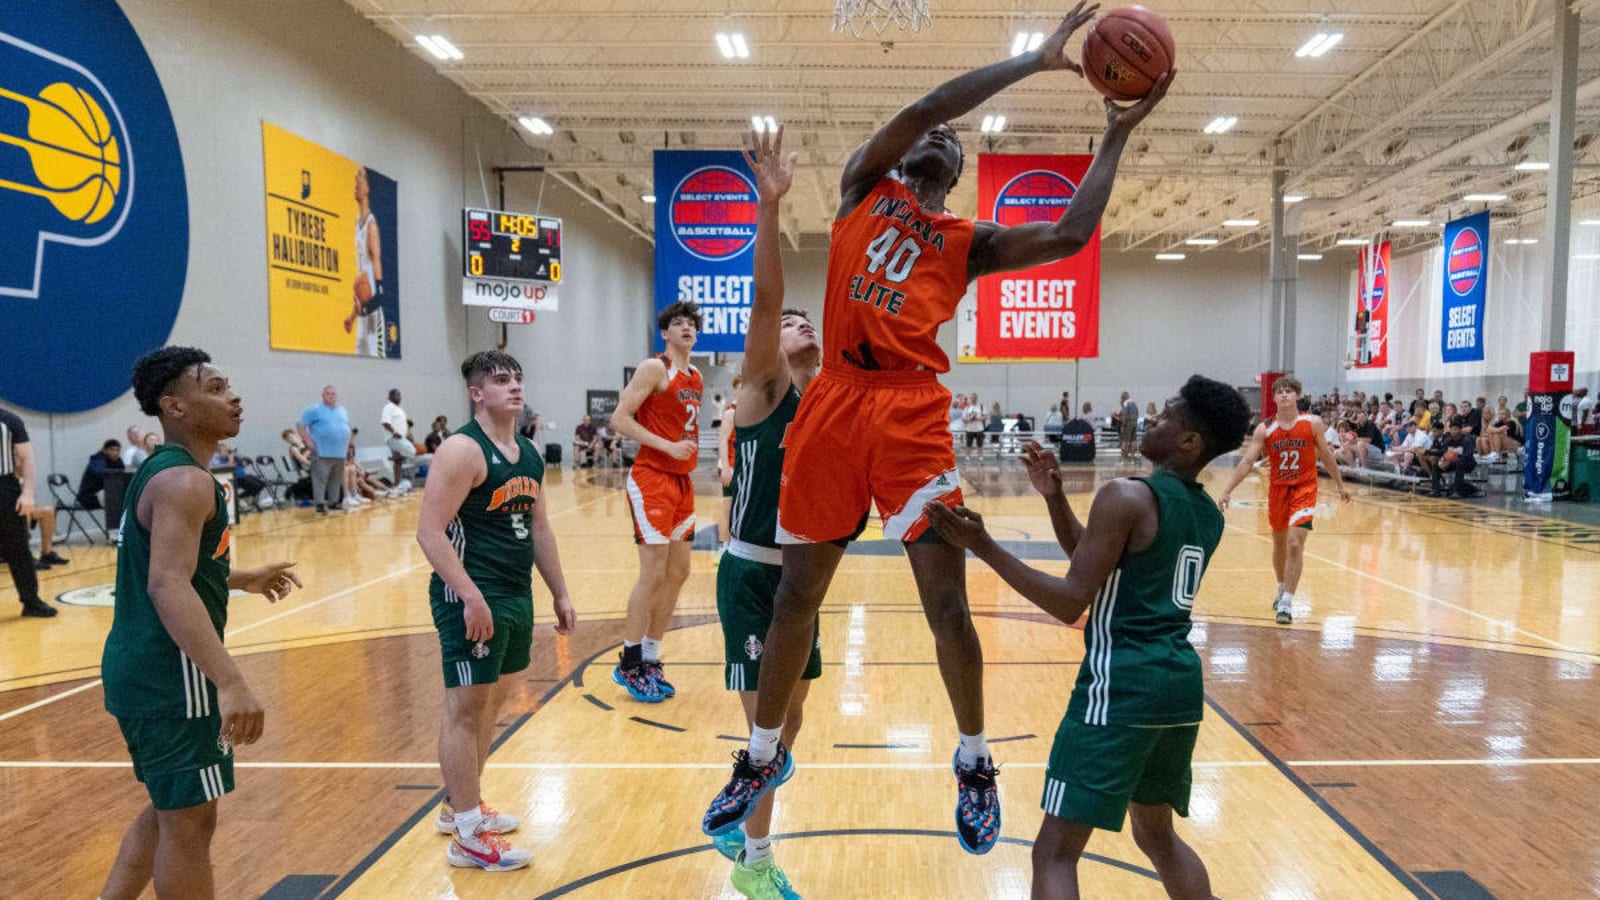 Recruiting Roundup: Five-Star 2024 Center Projected to Sign With UC; Five-Star Guard Teases Commitment